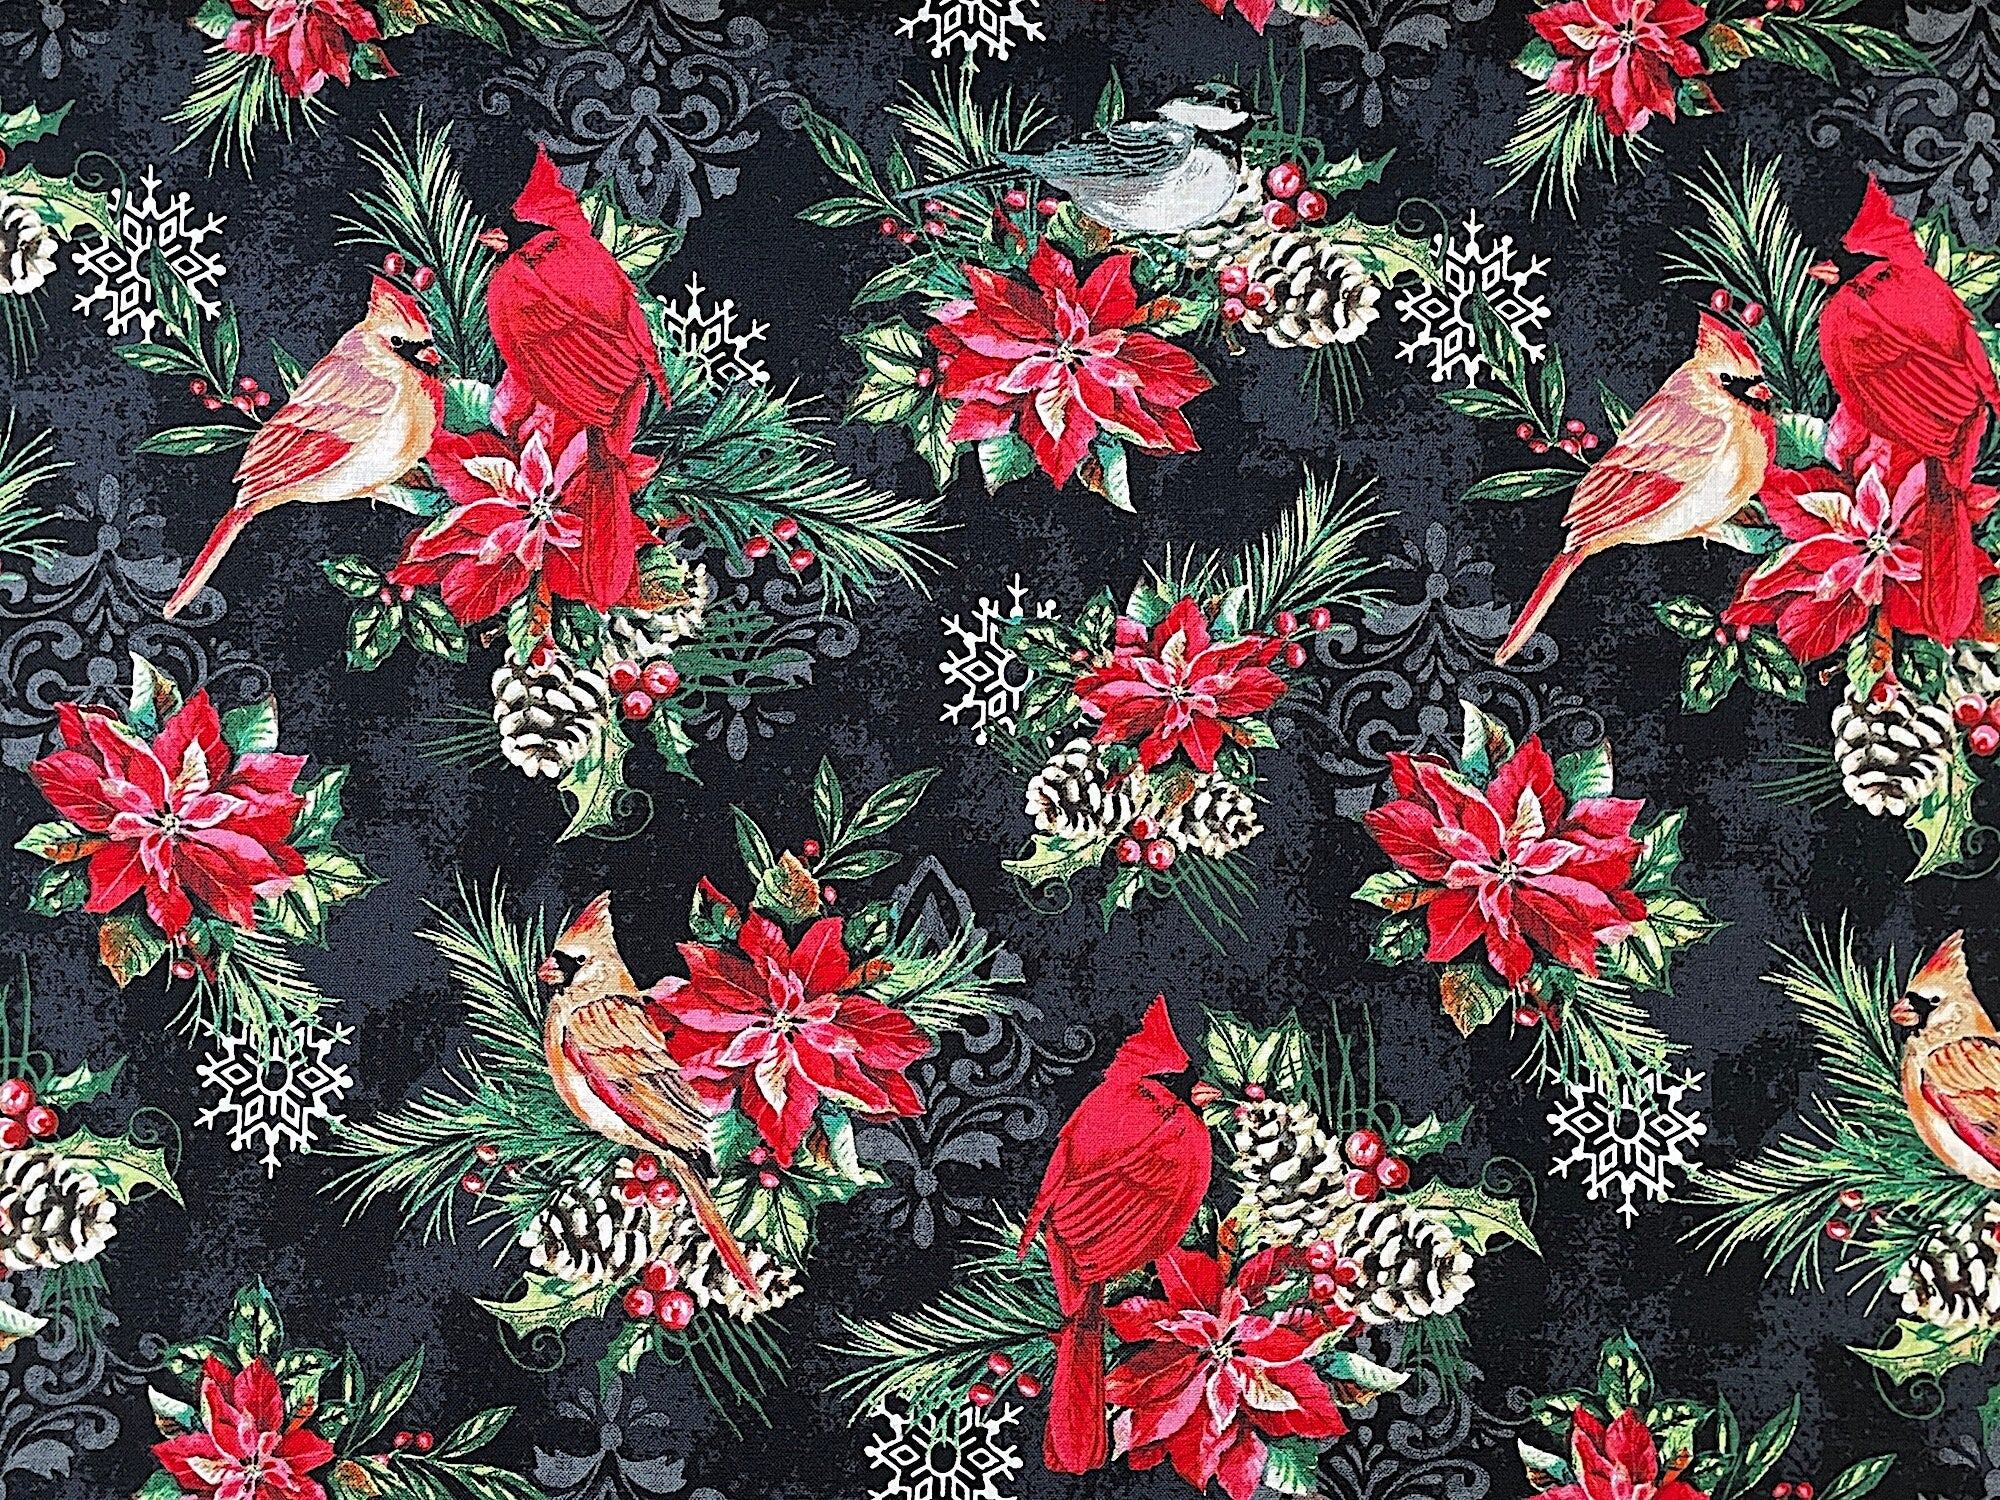 This fabric is part of the Holiday Greetings collection by Jean Plout. This Black colored fabric is covered with red cardinals sitting on branches made up of leaves, pine cones, poinsettias and leaves.